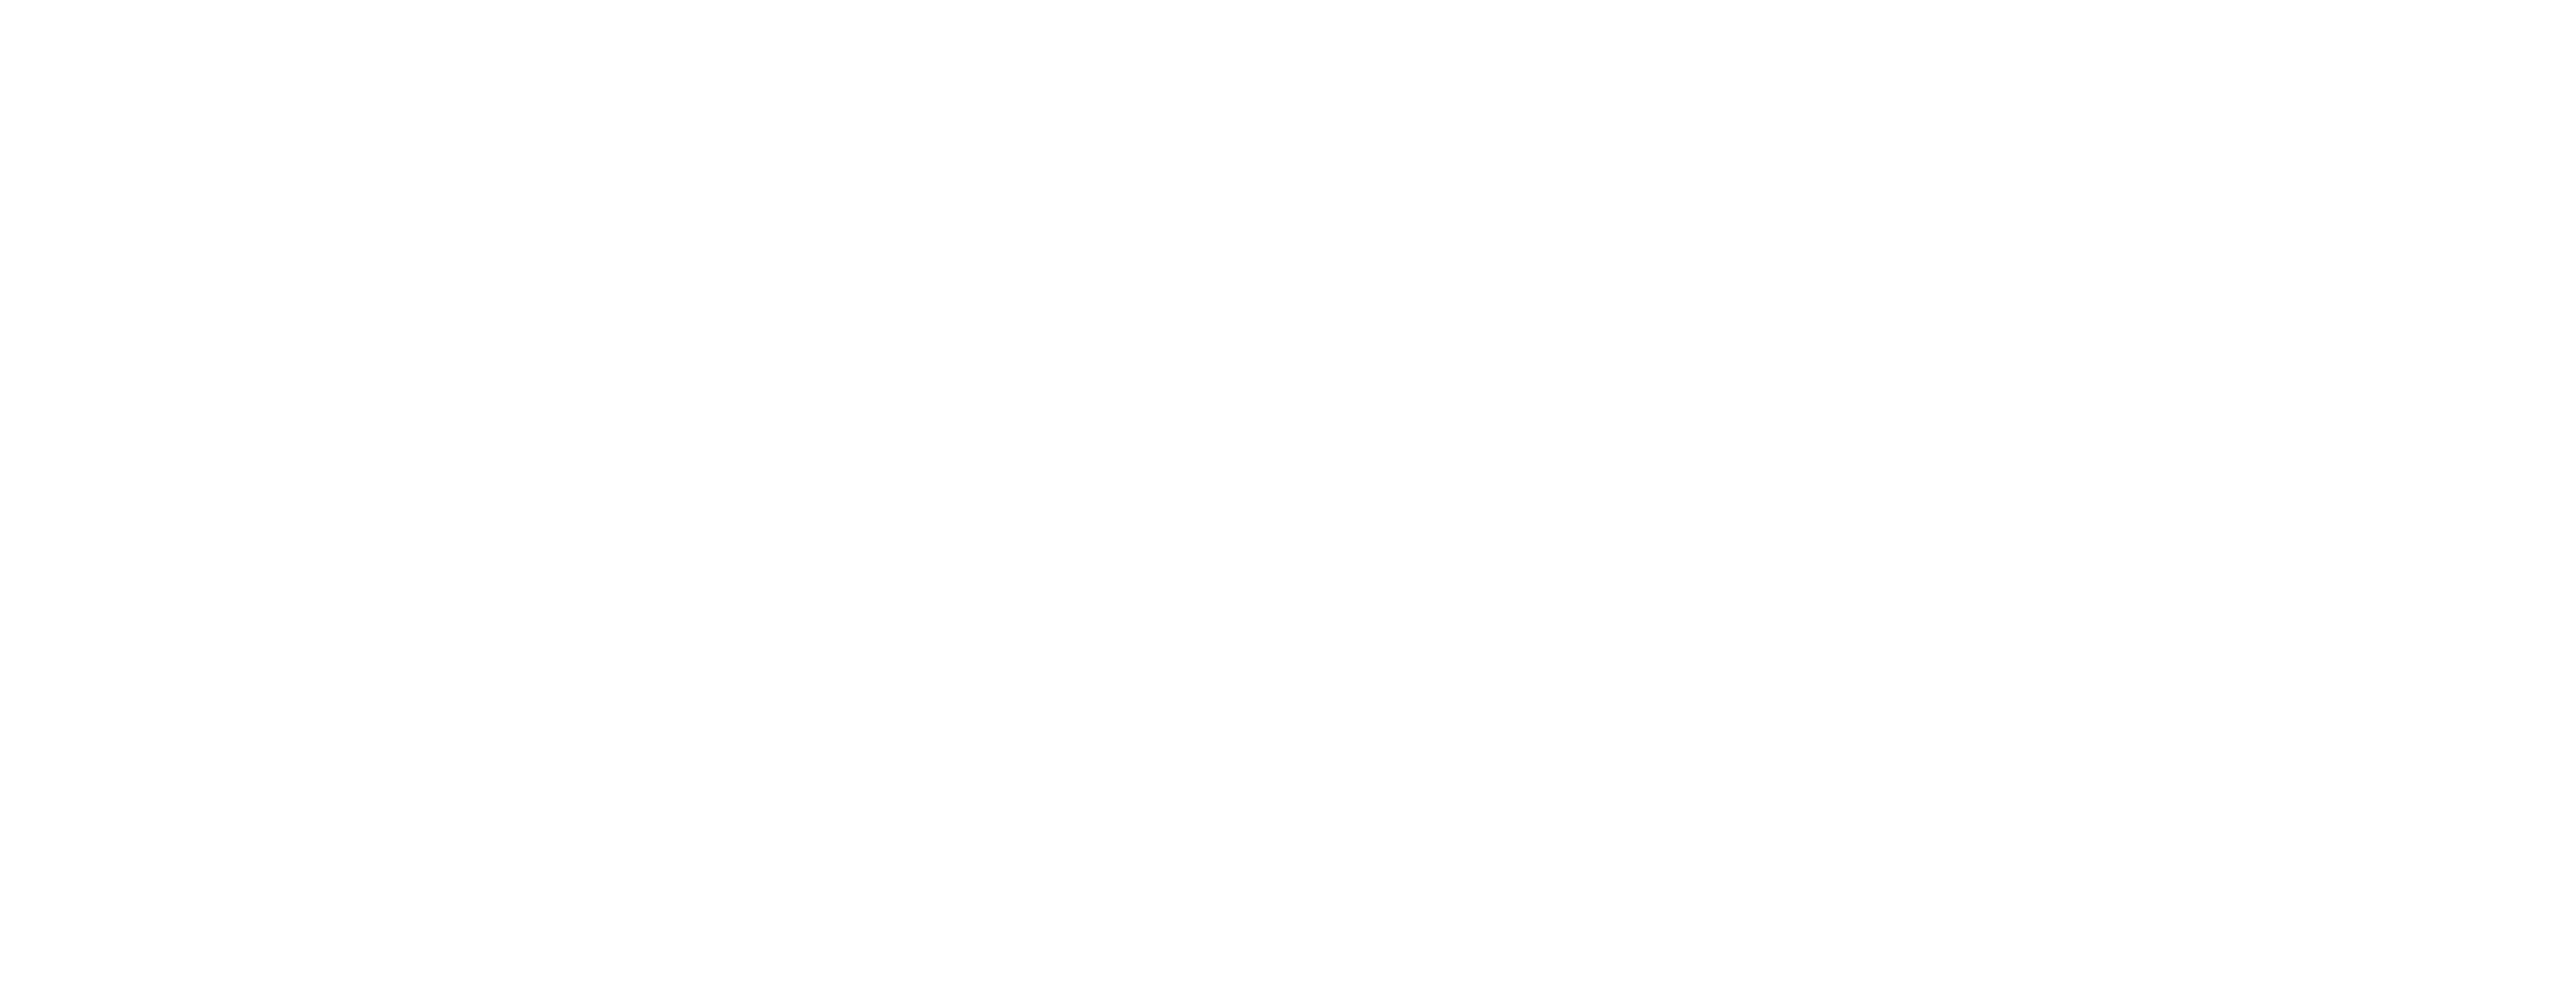 The logo of the website called 'The absolute realm'